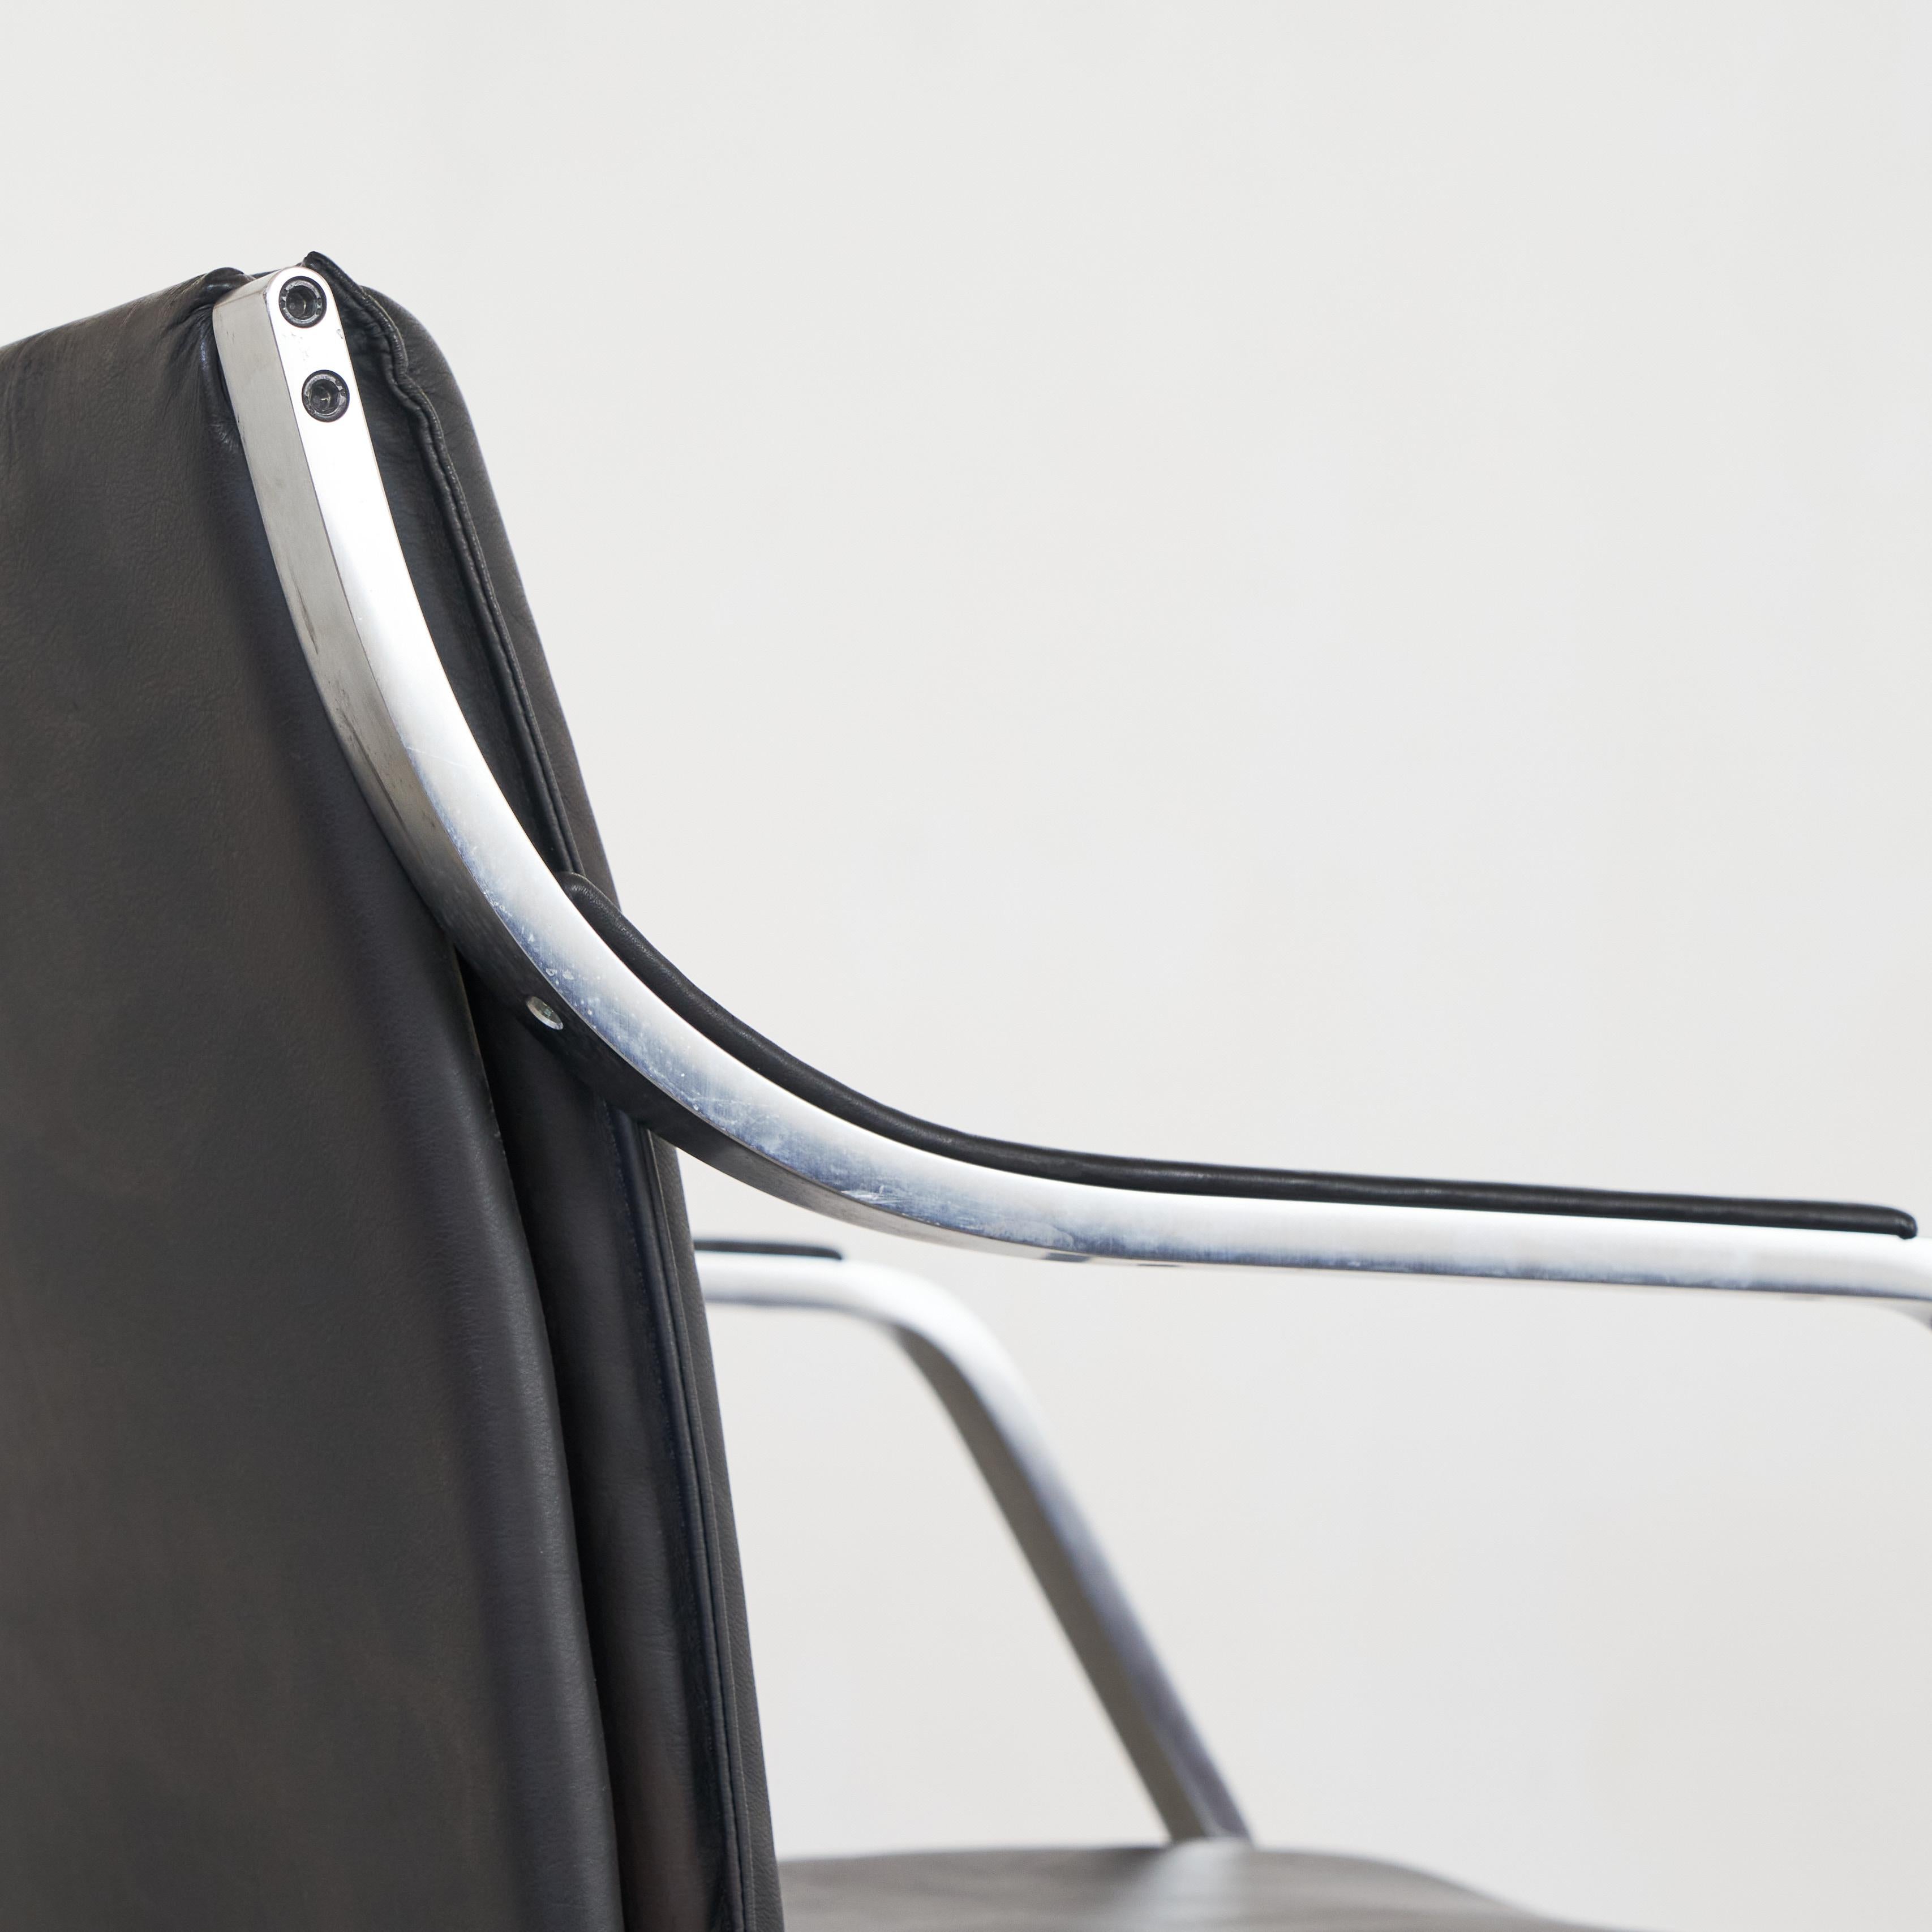 Hand-Crafted Rudolf Bernd Glatzel Armchair in Steel and Leather for Walter Knoll 1970s For Sale